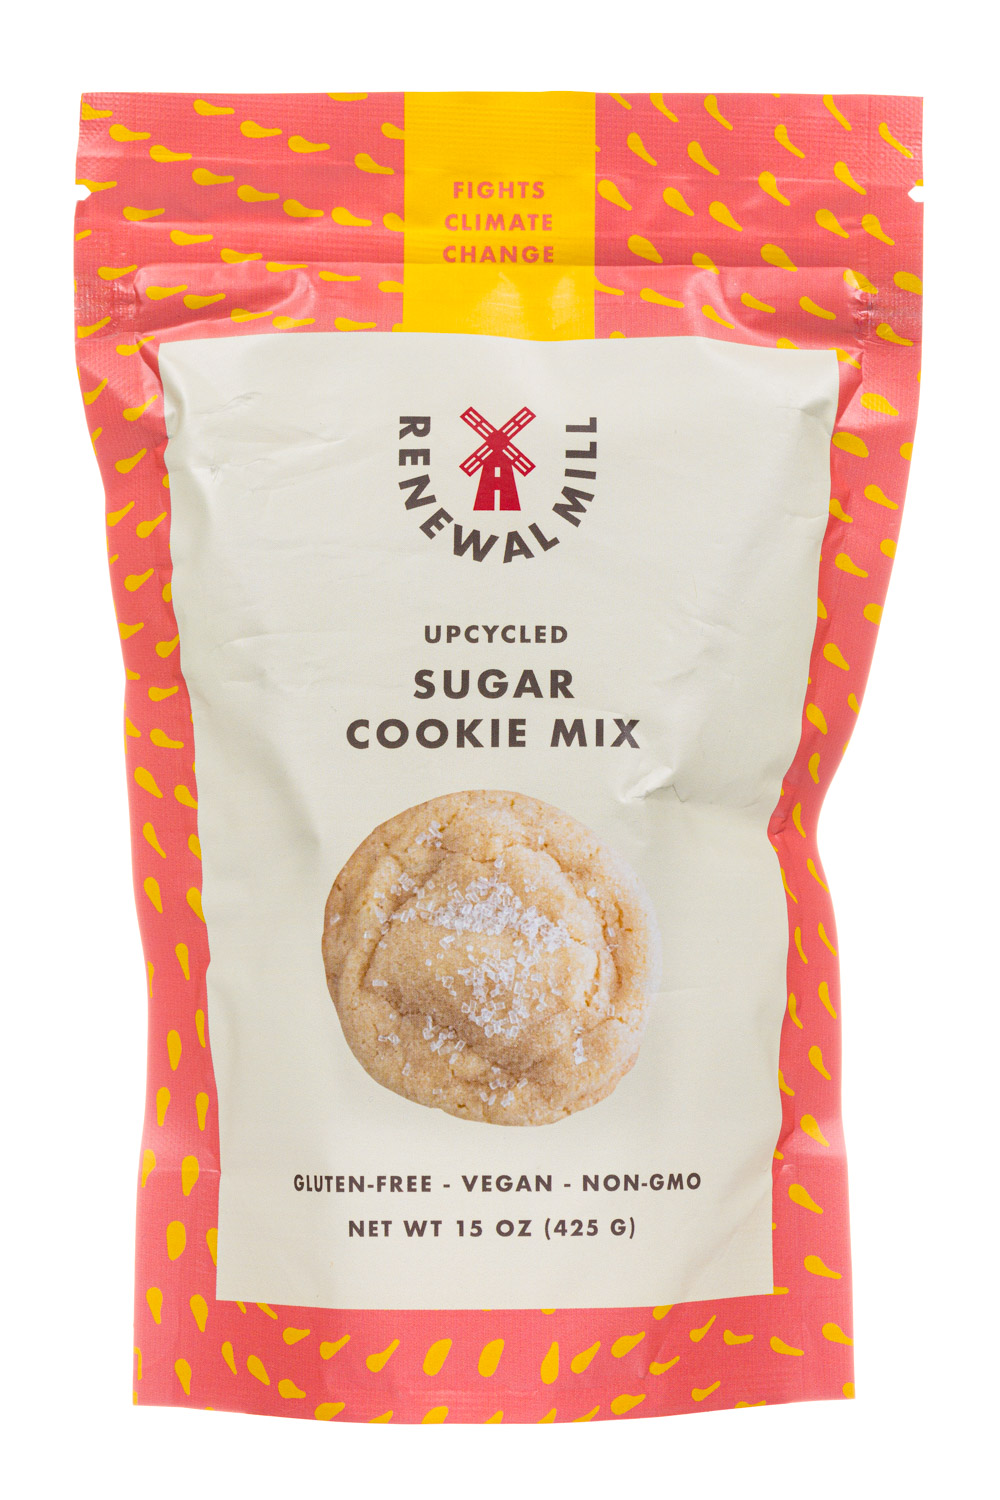 Upcycled Sugar Cookie Mix 2021